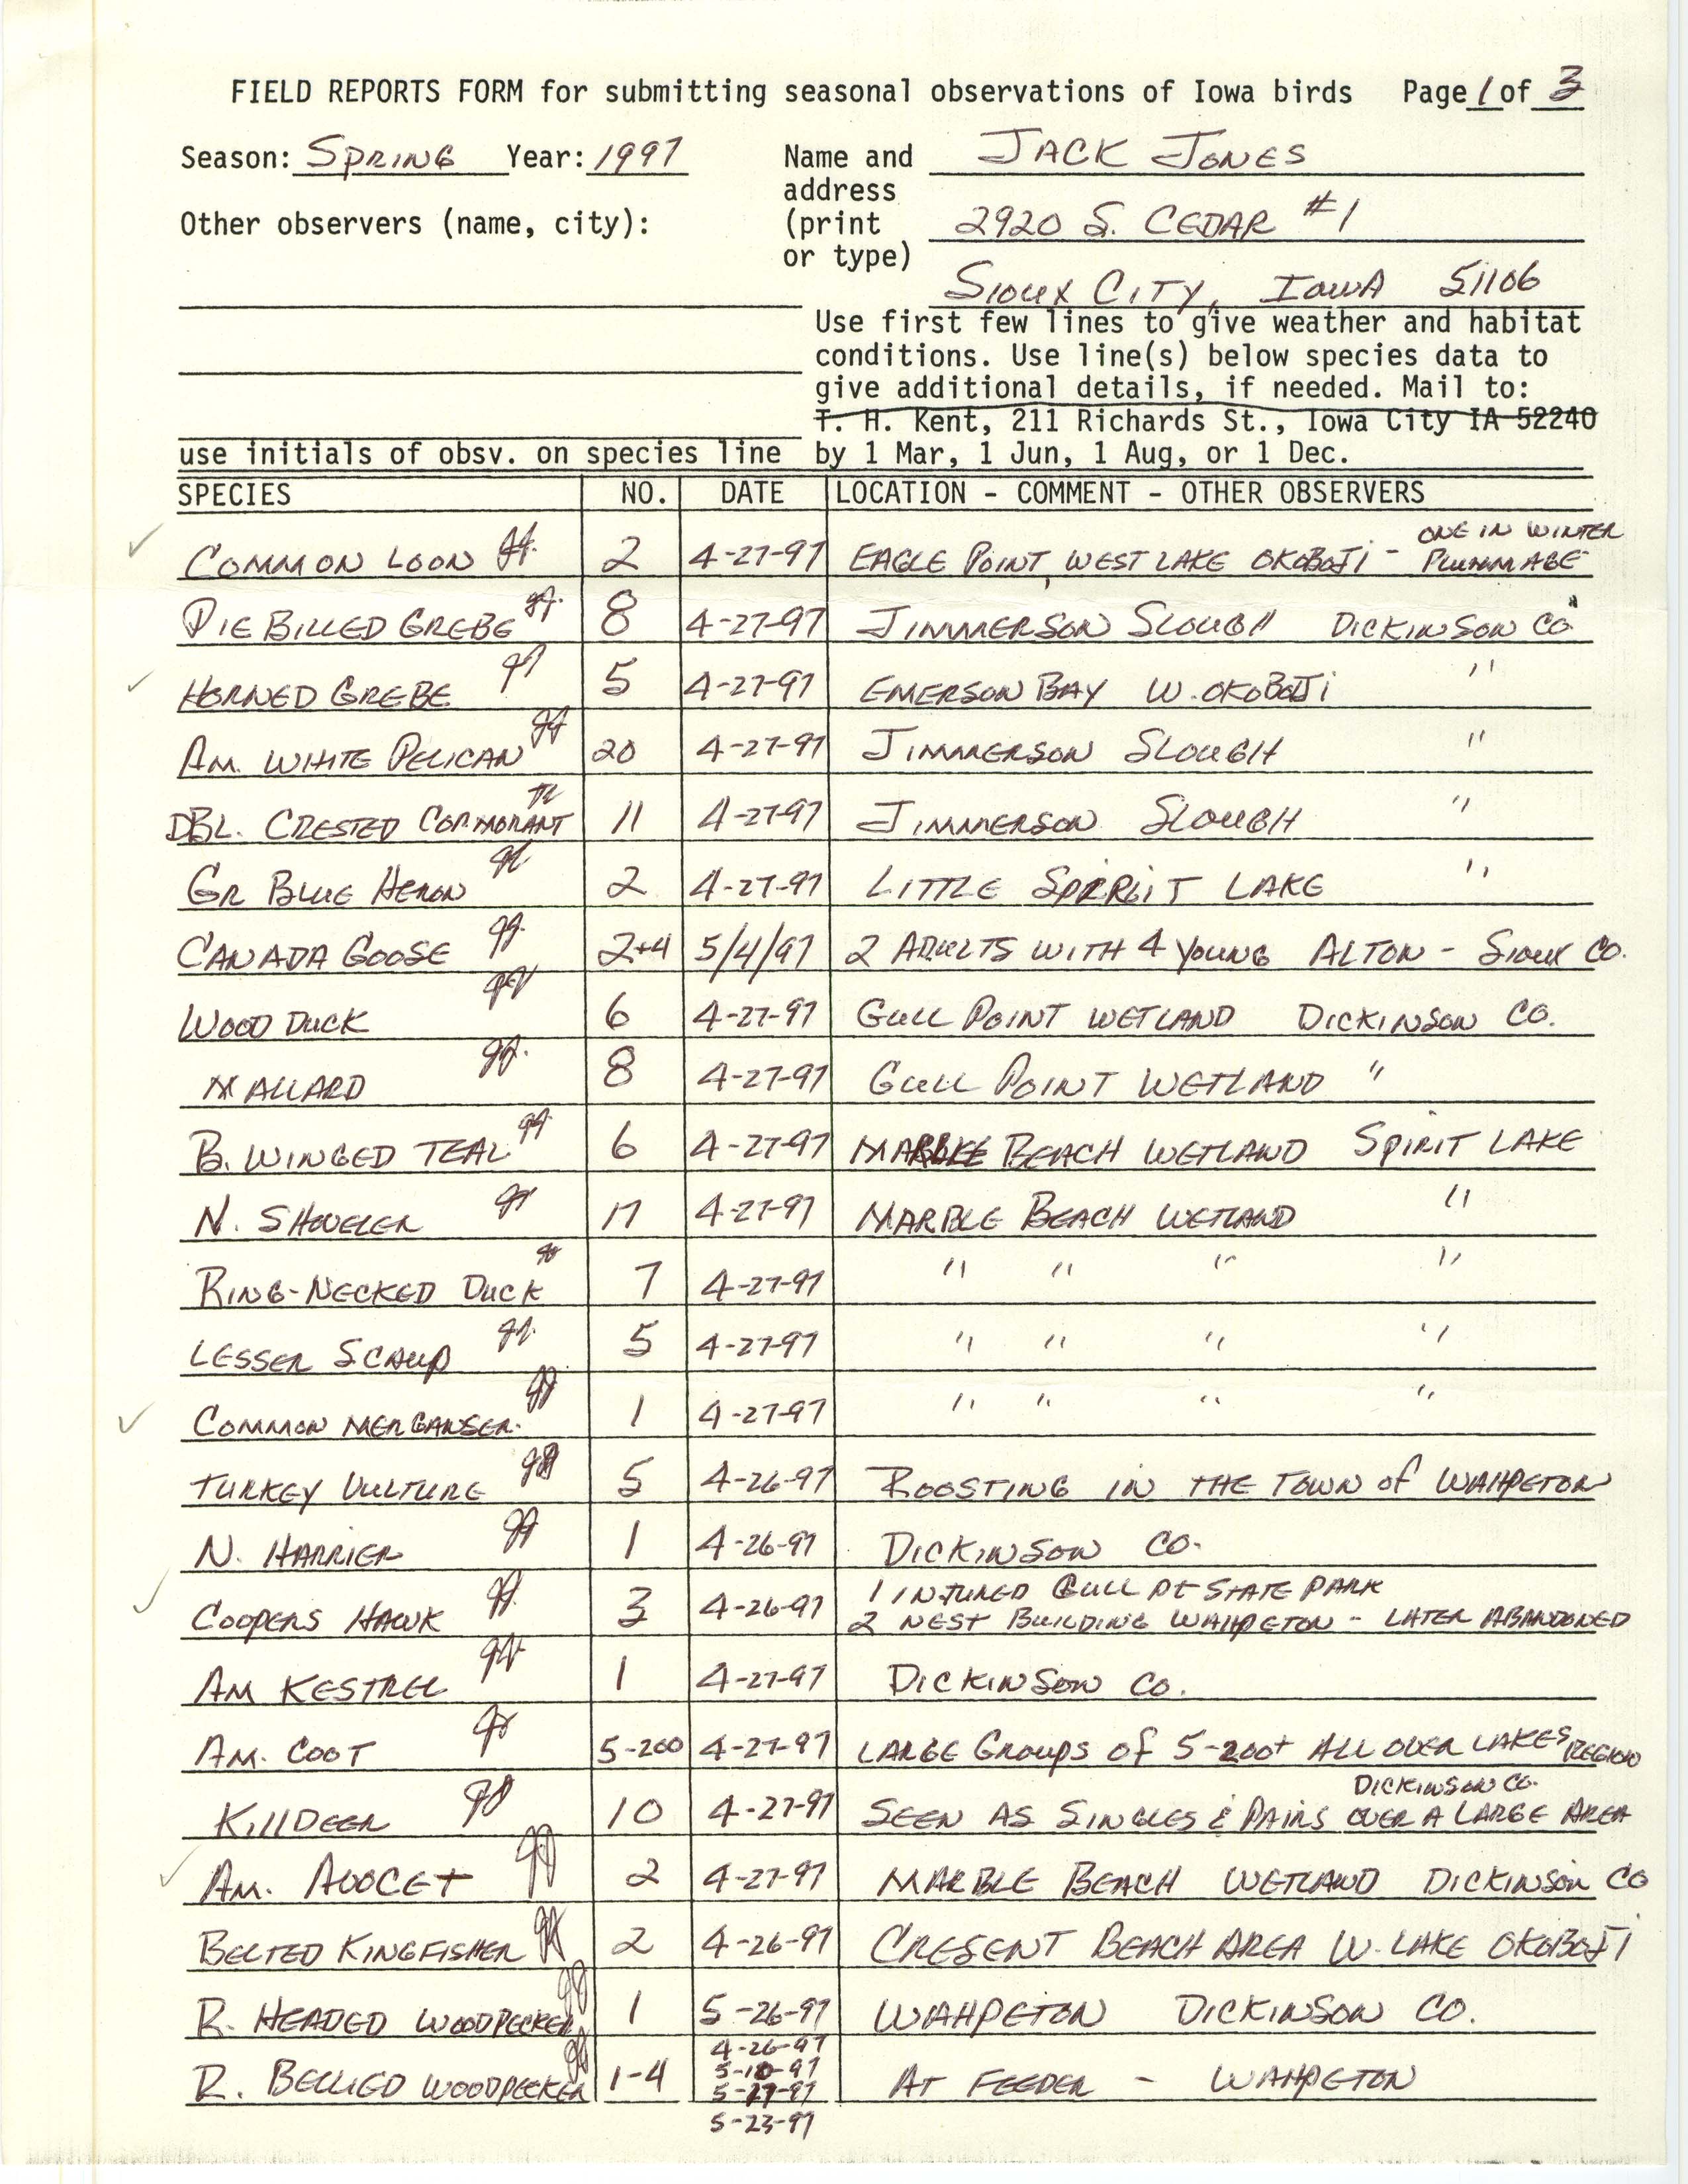 Field reports form for submitting seasonal observations of Iowa birds, Jack Jones, spring 1997